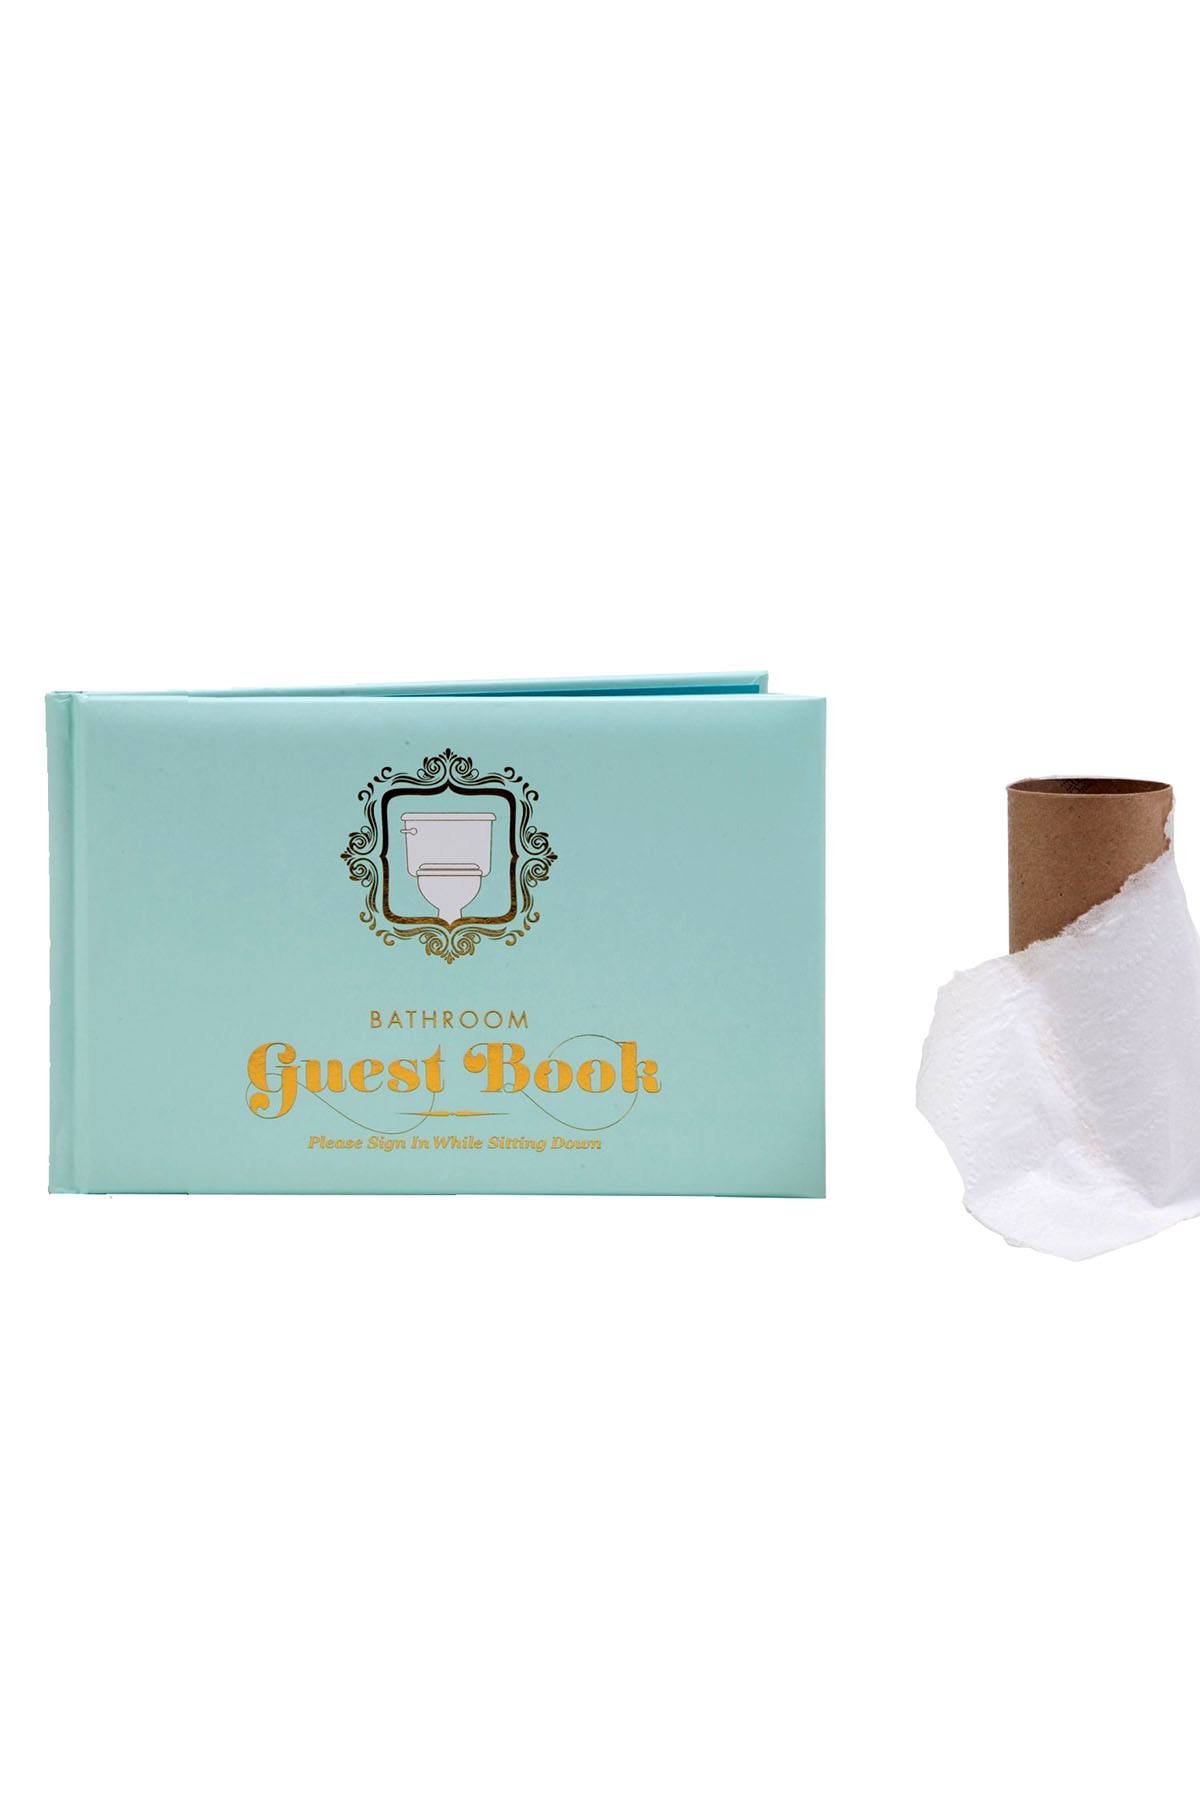 Knock Knock Turquoise Bathroom Guest Book